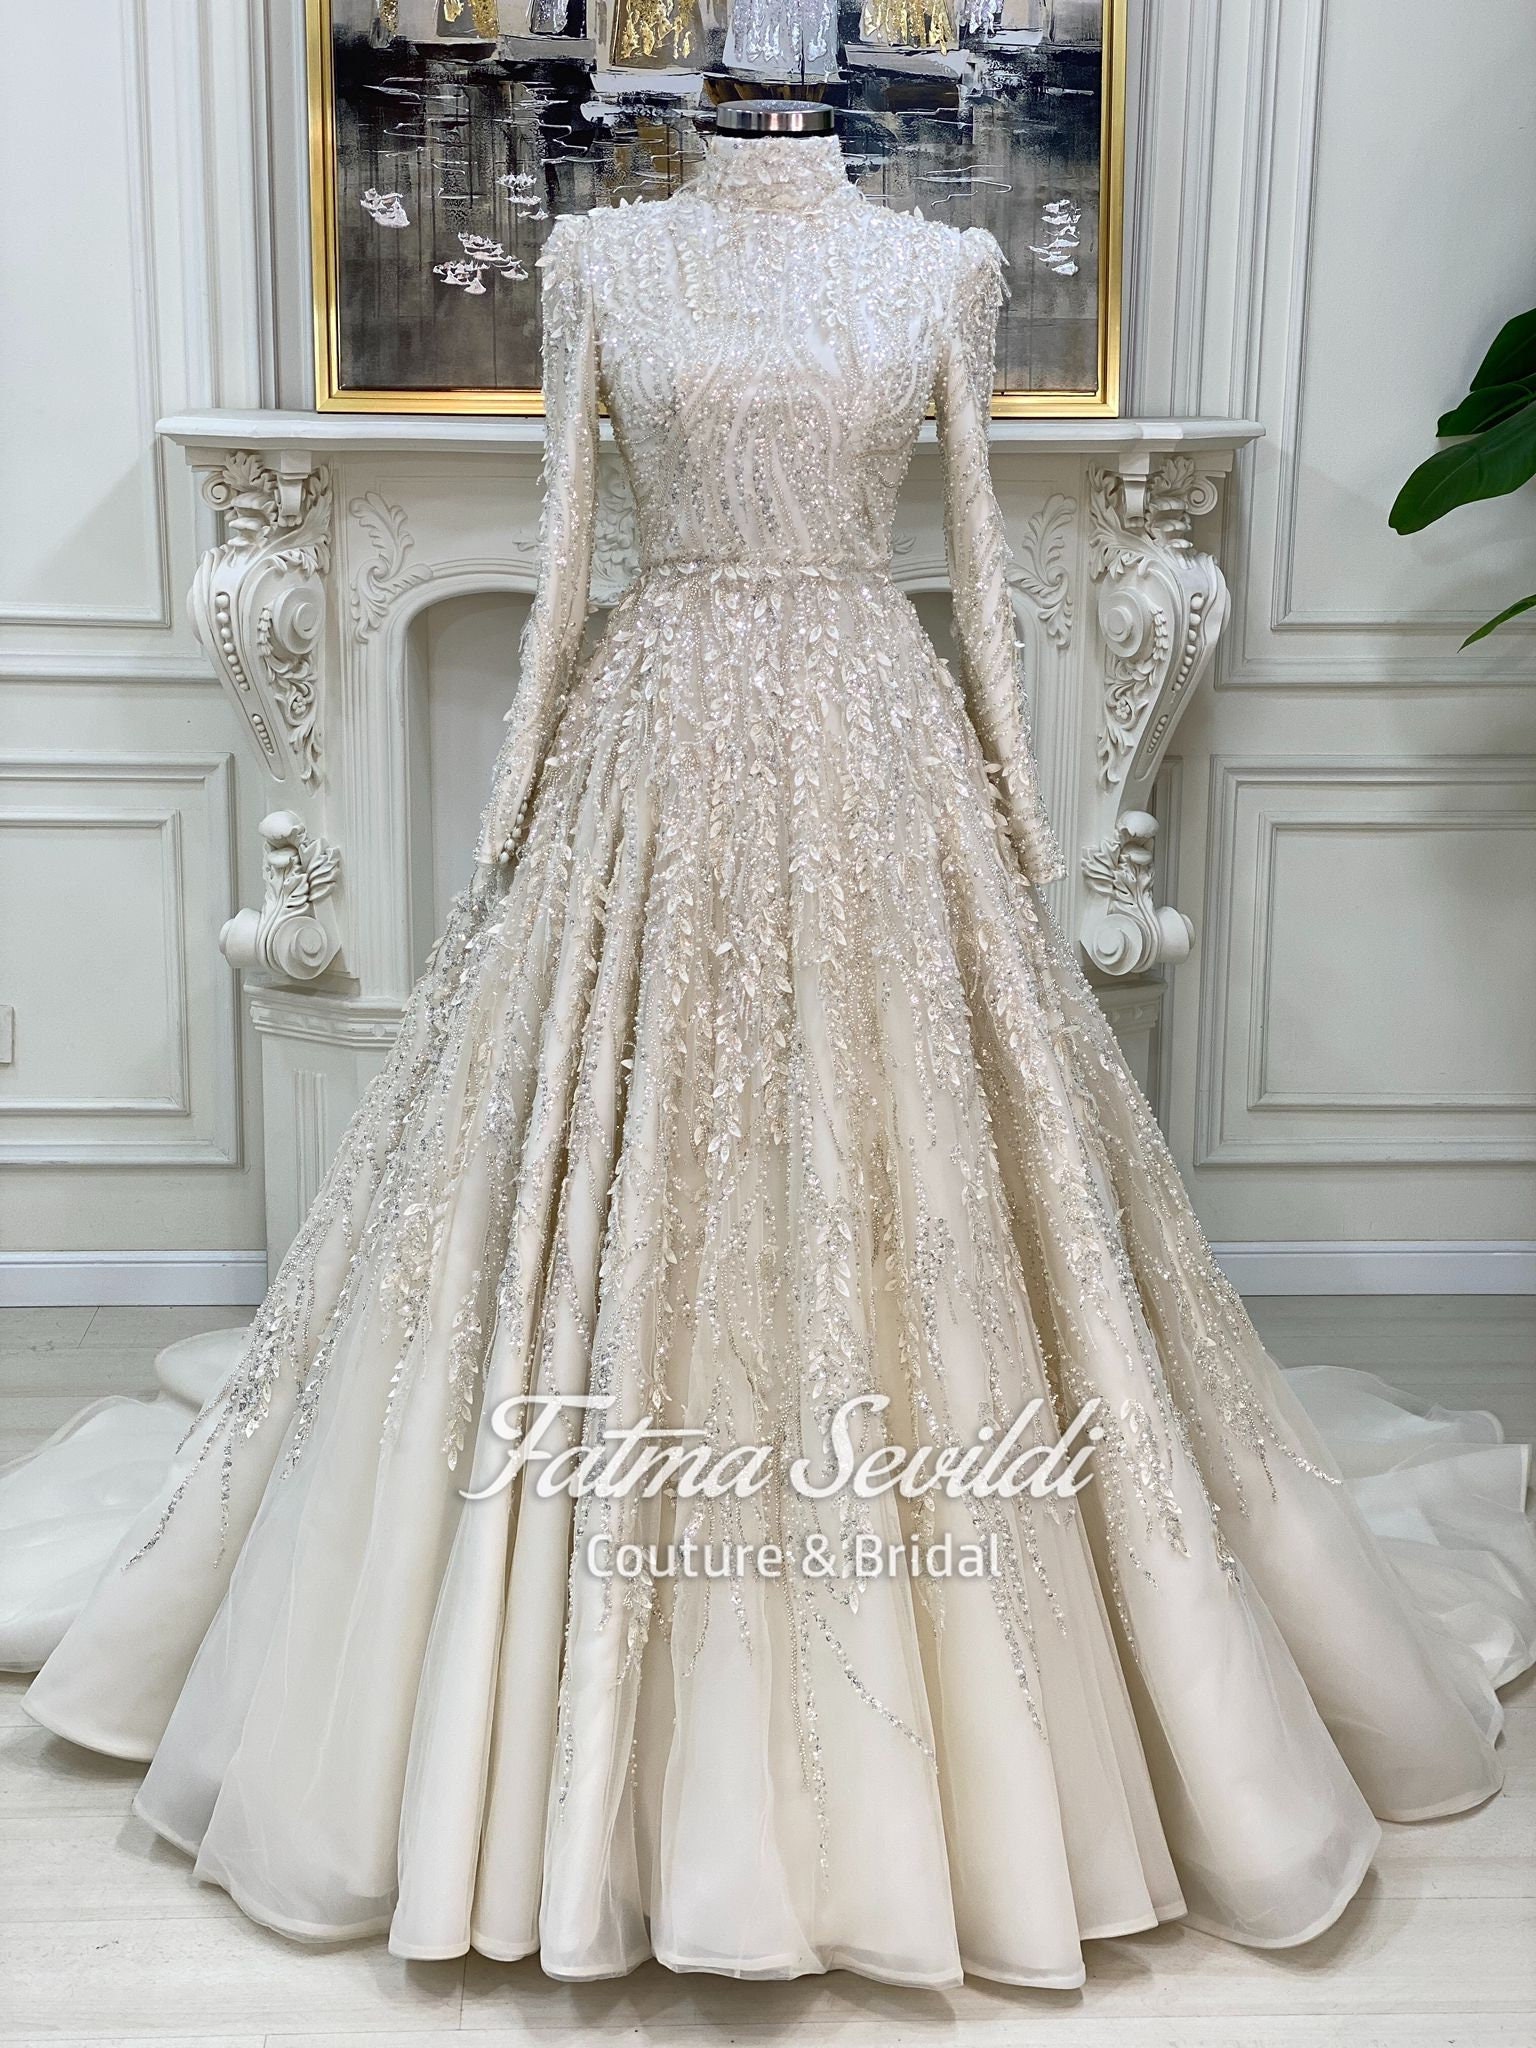 2021 Modest Pink Ball Gown Muslim Wedding Dresses With Hijab Long Sleeves  Islamic Arabic Lace Wedding Dress Bridal Gowns Vestidos De Novia From  130,59 € | DHgate